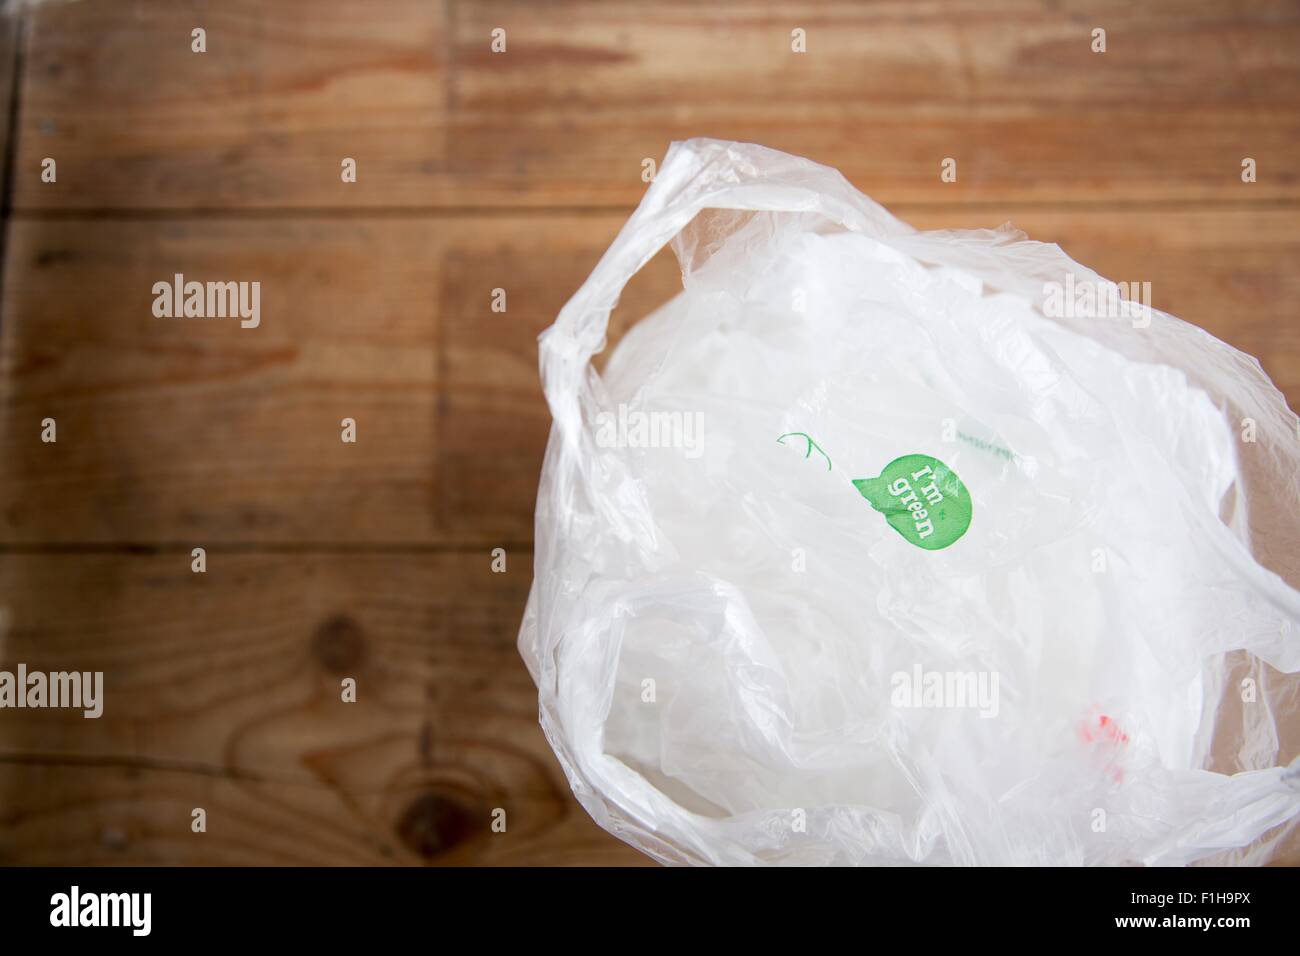 Recyclable plastic shopping bags on wooden floor Stock Photo